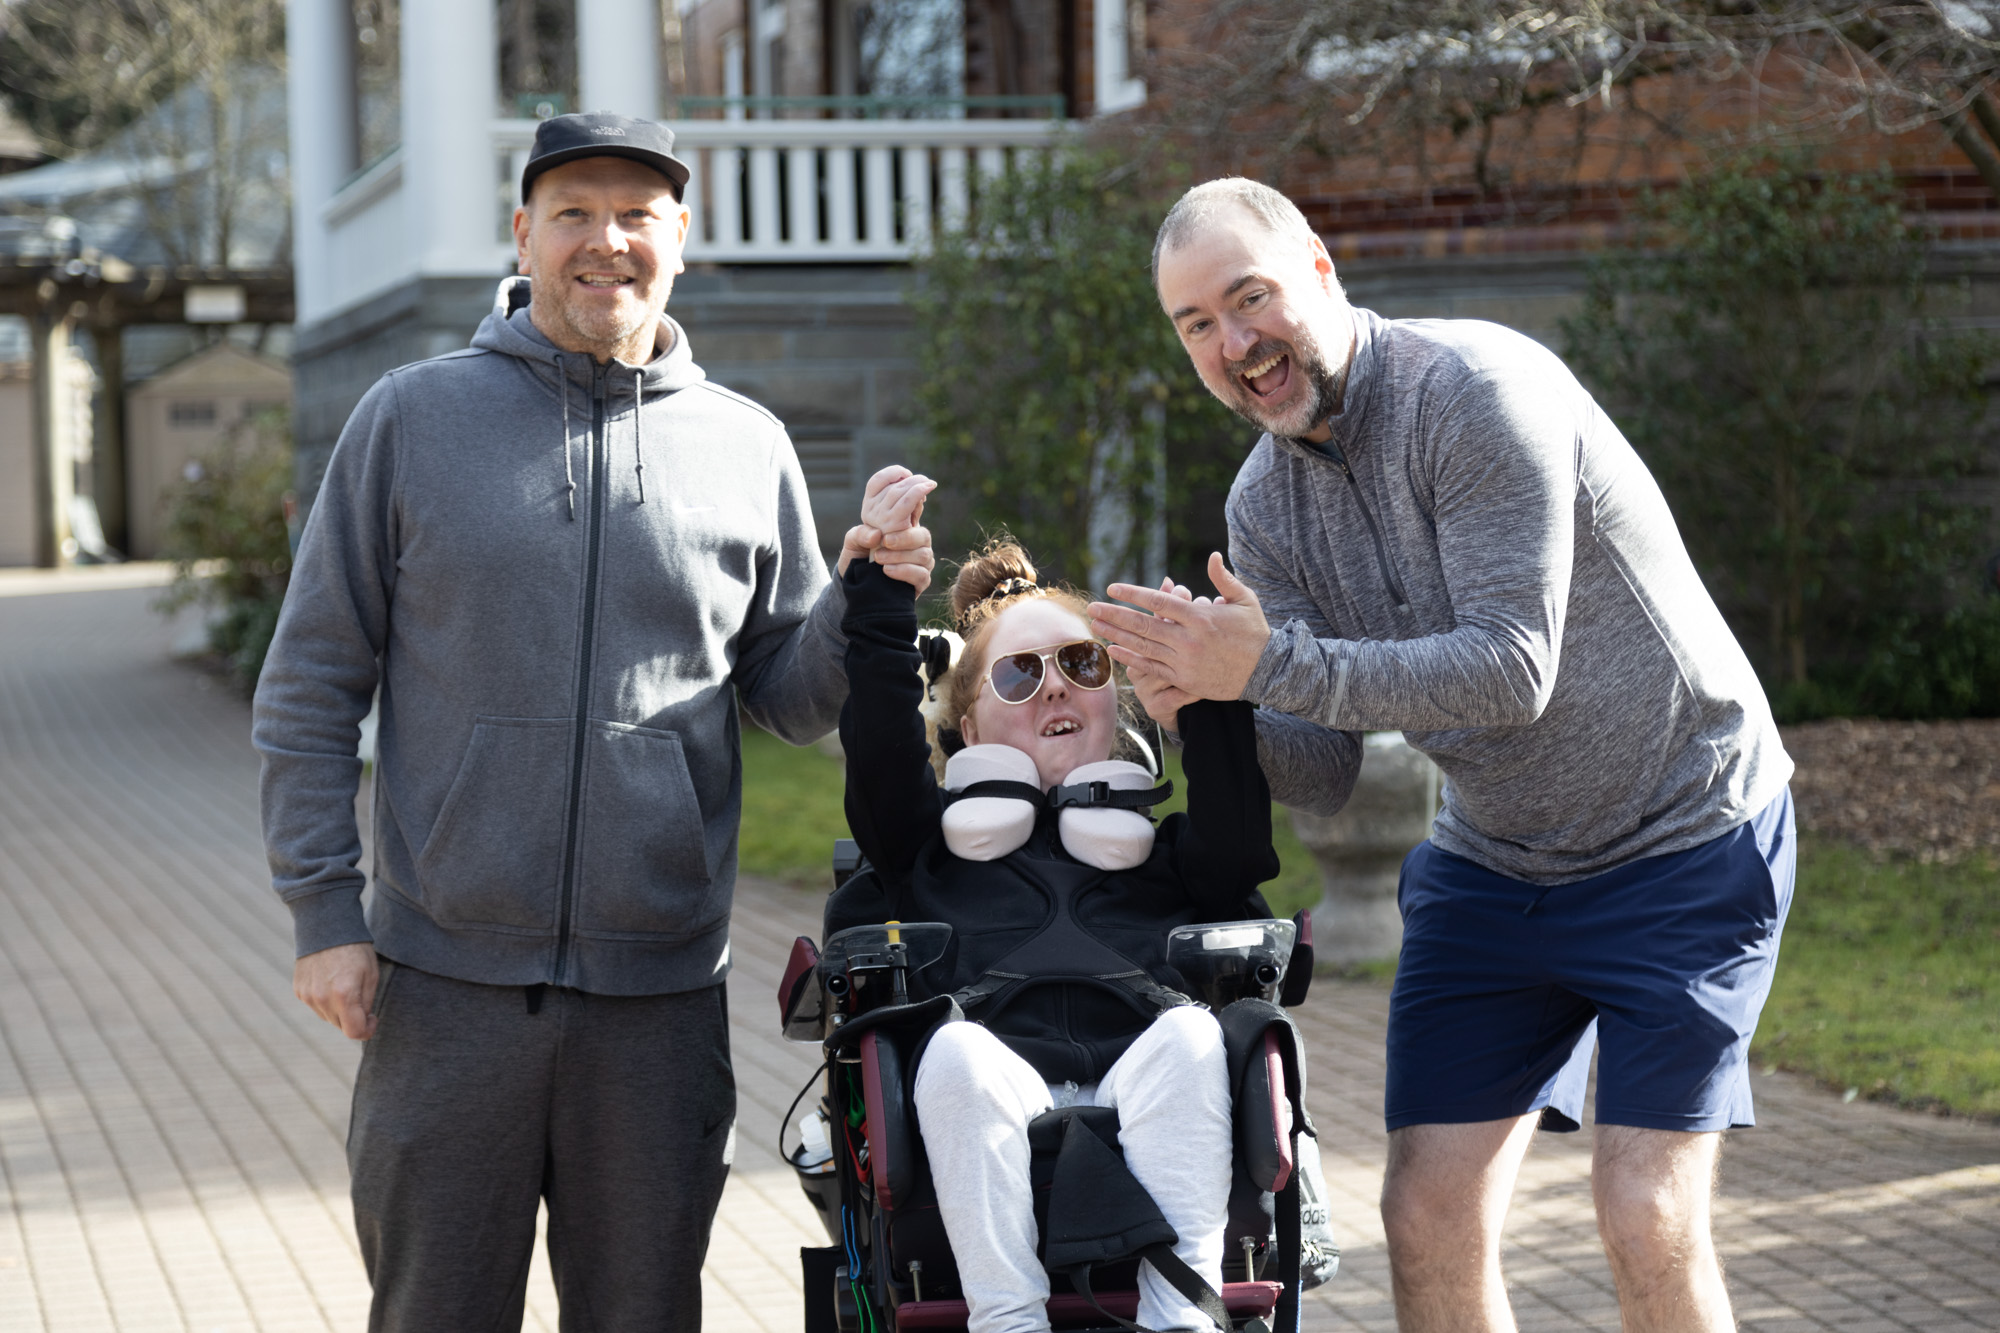 An outdoor photograph featuring three people sharing a joyful moment. On the left is a man dressed in a gray hoodie and matching sweatpants, smiling at the camera. In the center is a young girl in a wheelchair wearing sunglasses and a neck support, their arms raised mid-laughter. On the right is another man, crouching slightly, in a gray long-sleeved shirt and navy shorts, clapping and laughing along. The background is the exterior of Canuck Place Children's Hospice Vancouver - Glen Brae Manor.